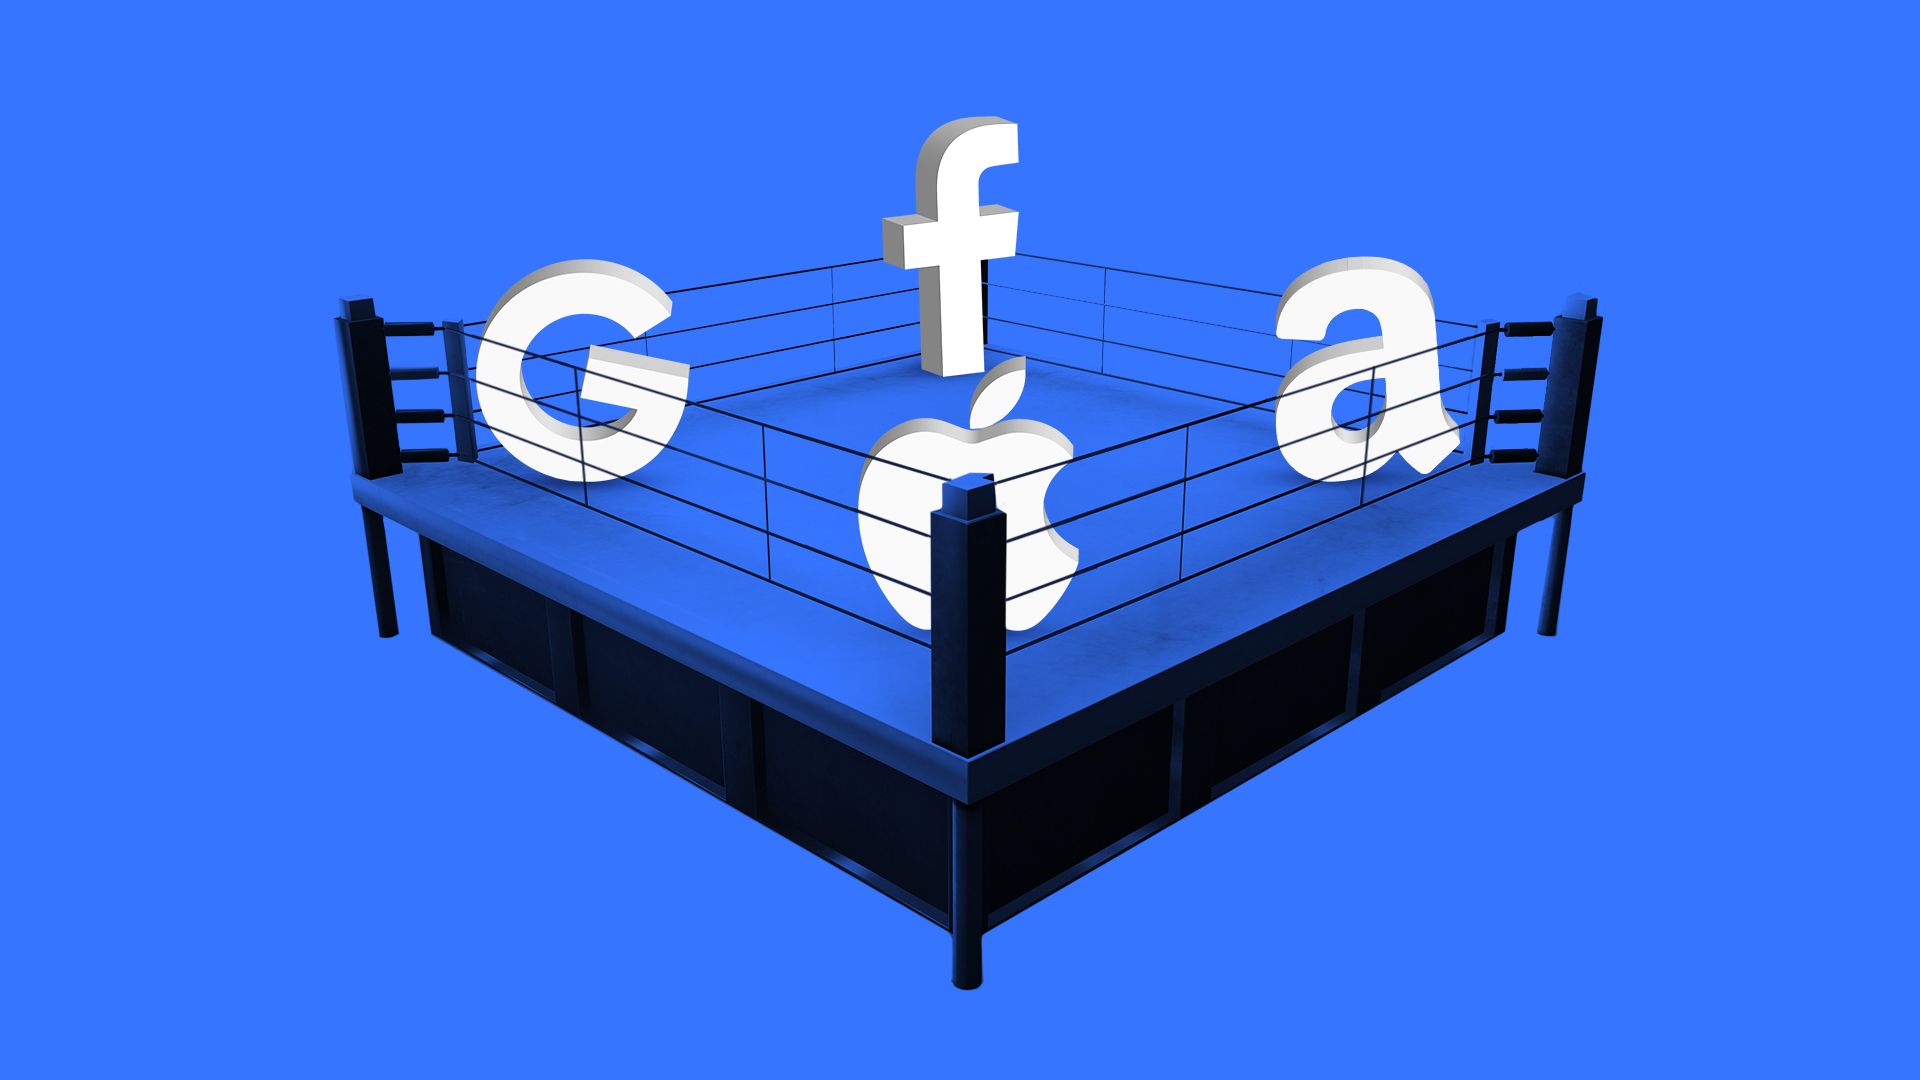 Illustration of tech logos in a boxing ring